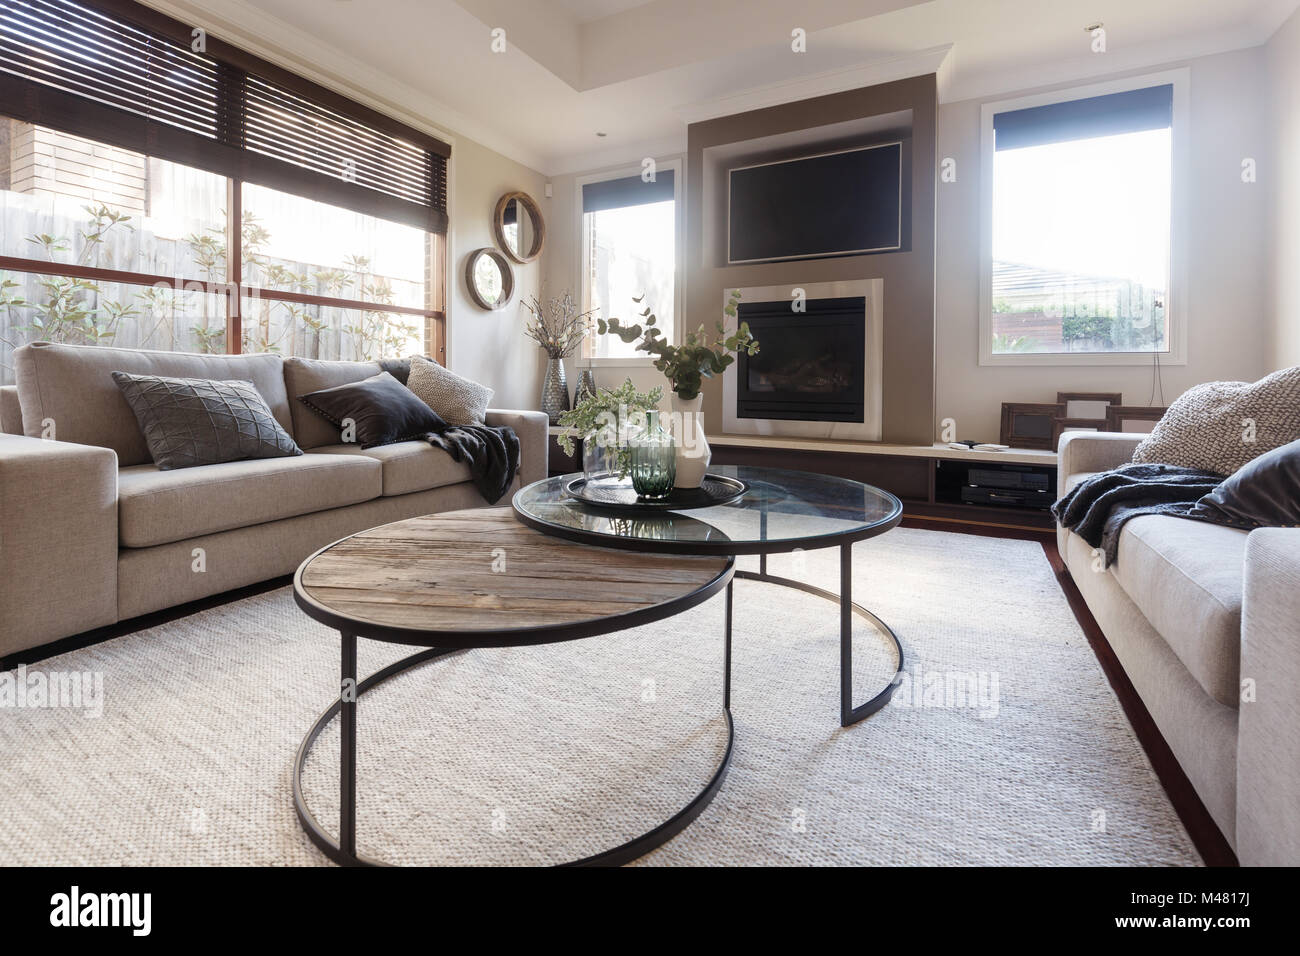 Designer family home casual living room in neutral tones and textures Stock Photo